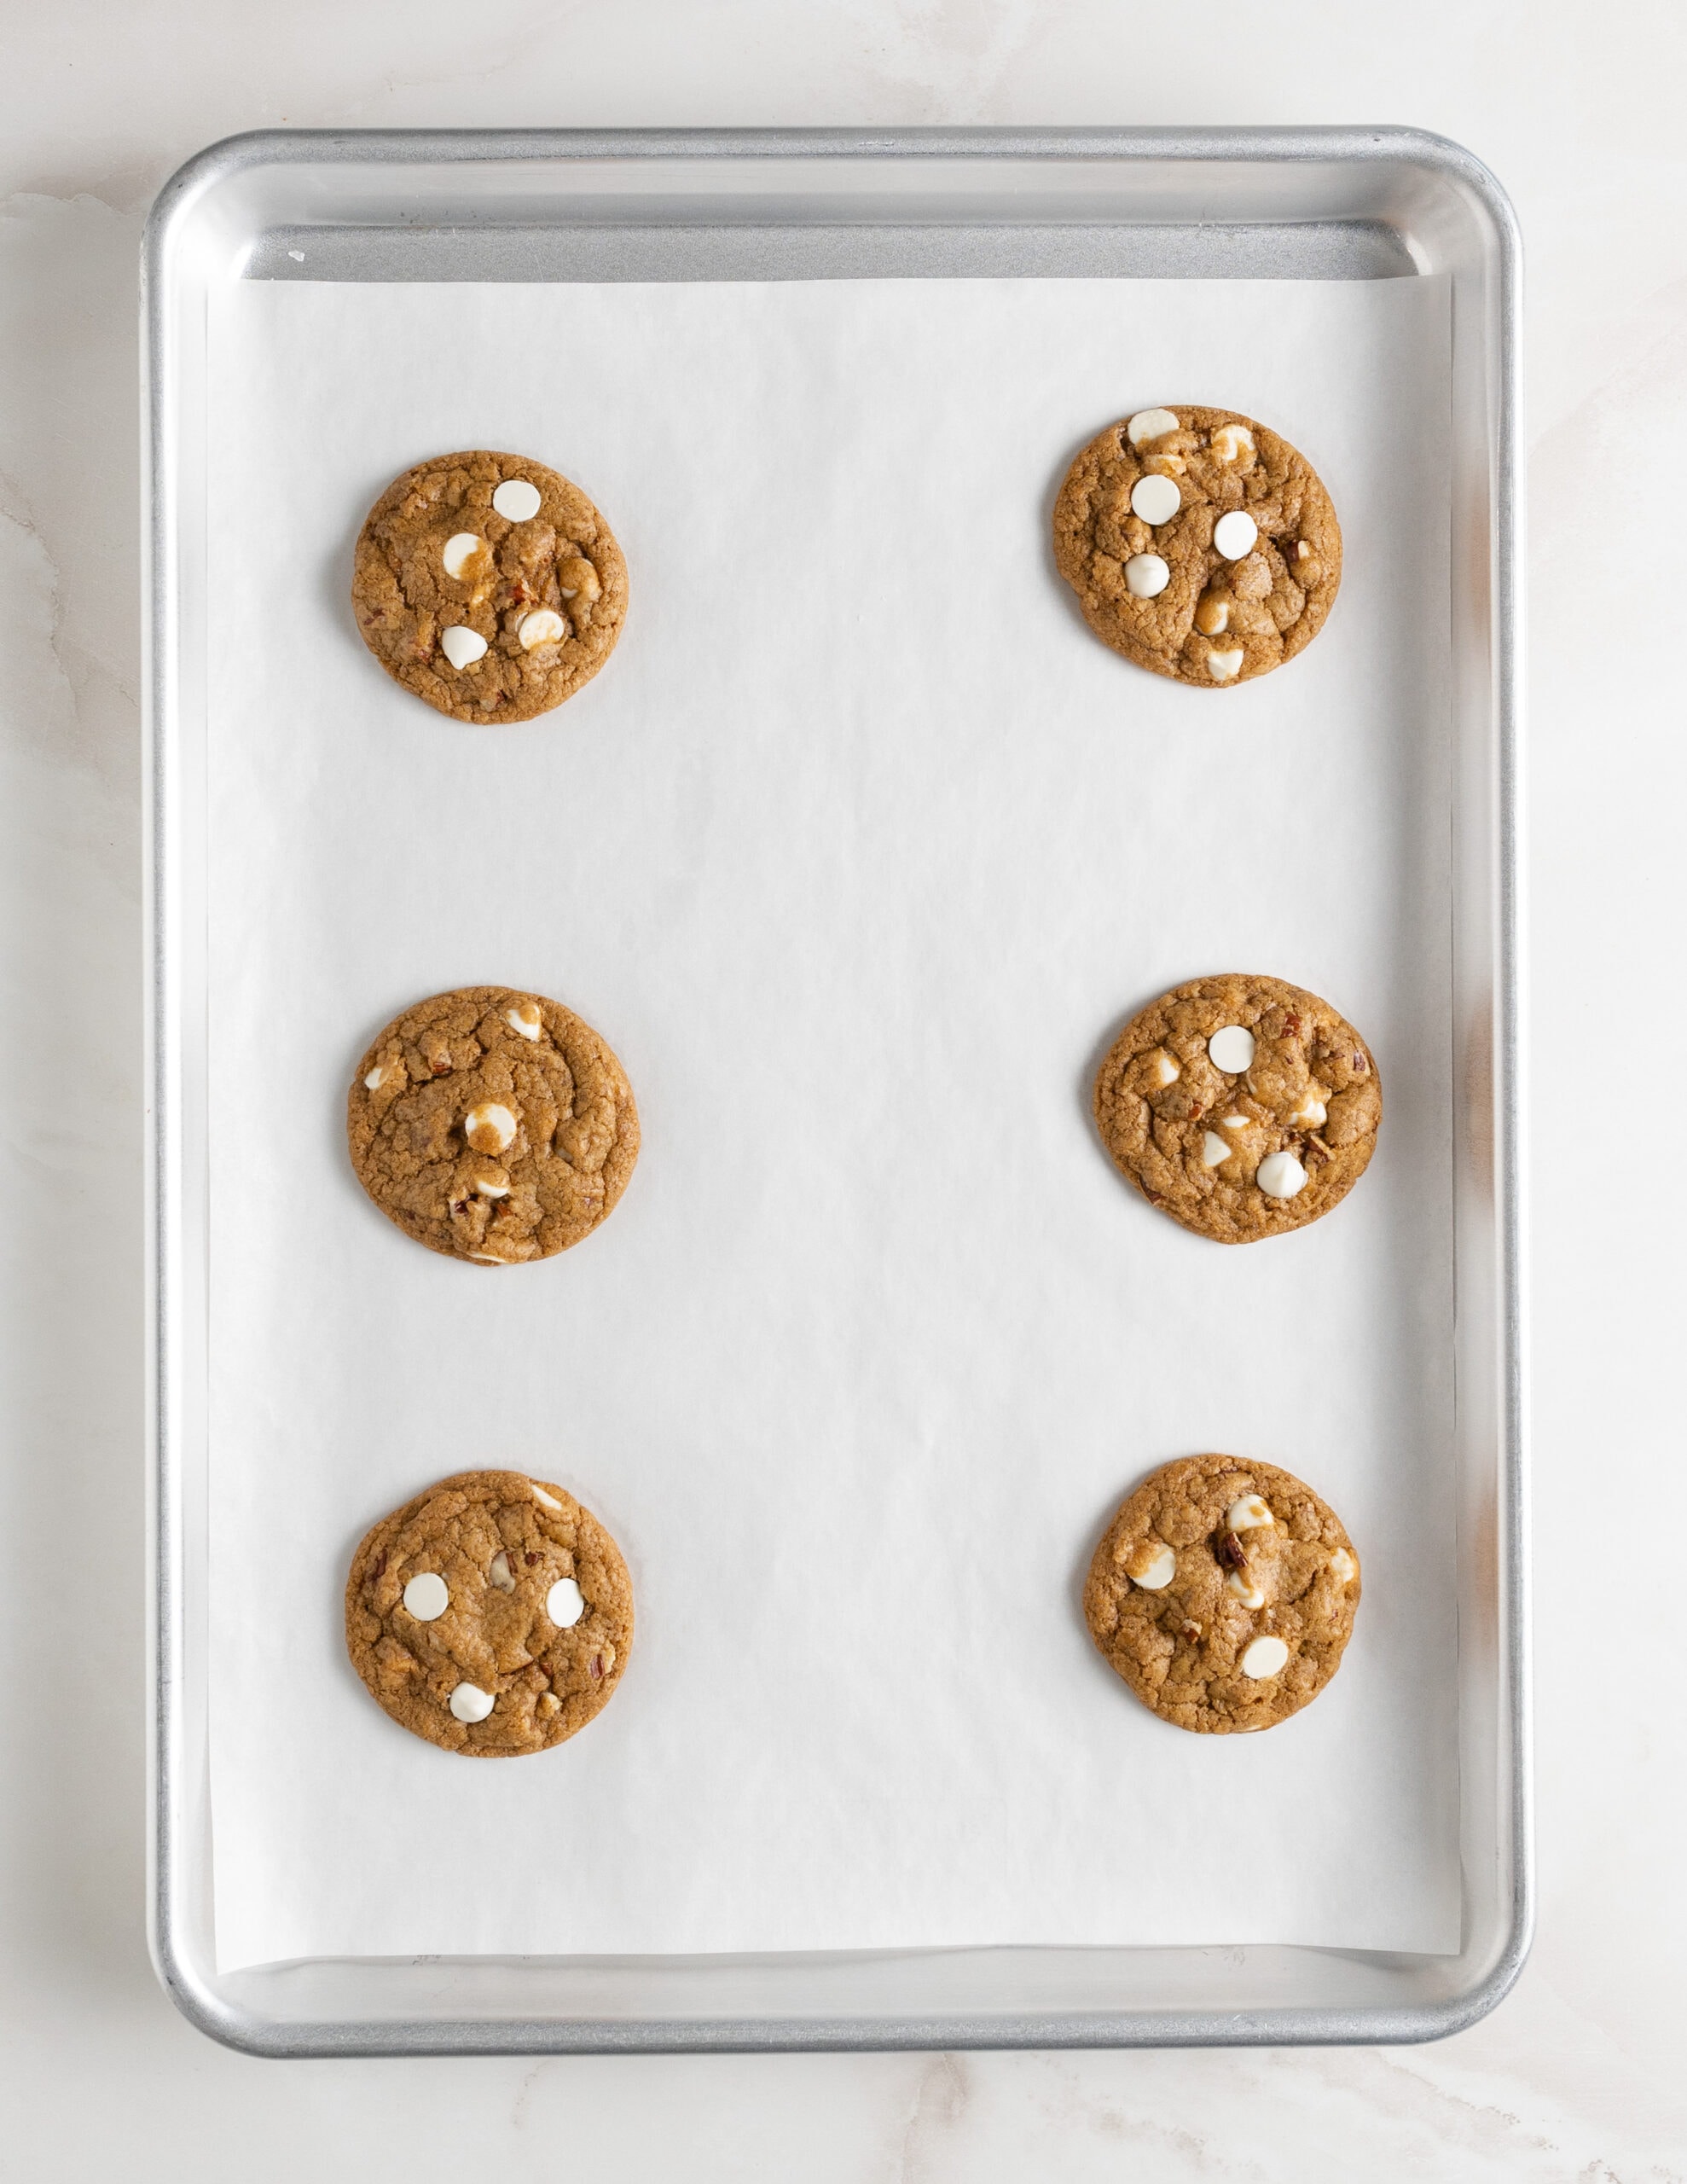 Large silver baking tray with white parchment paper and size white chocolate pumpkin pecan cookies baked. 